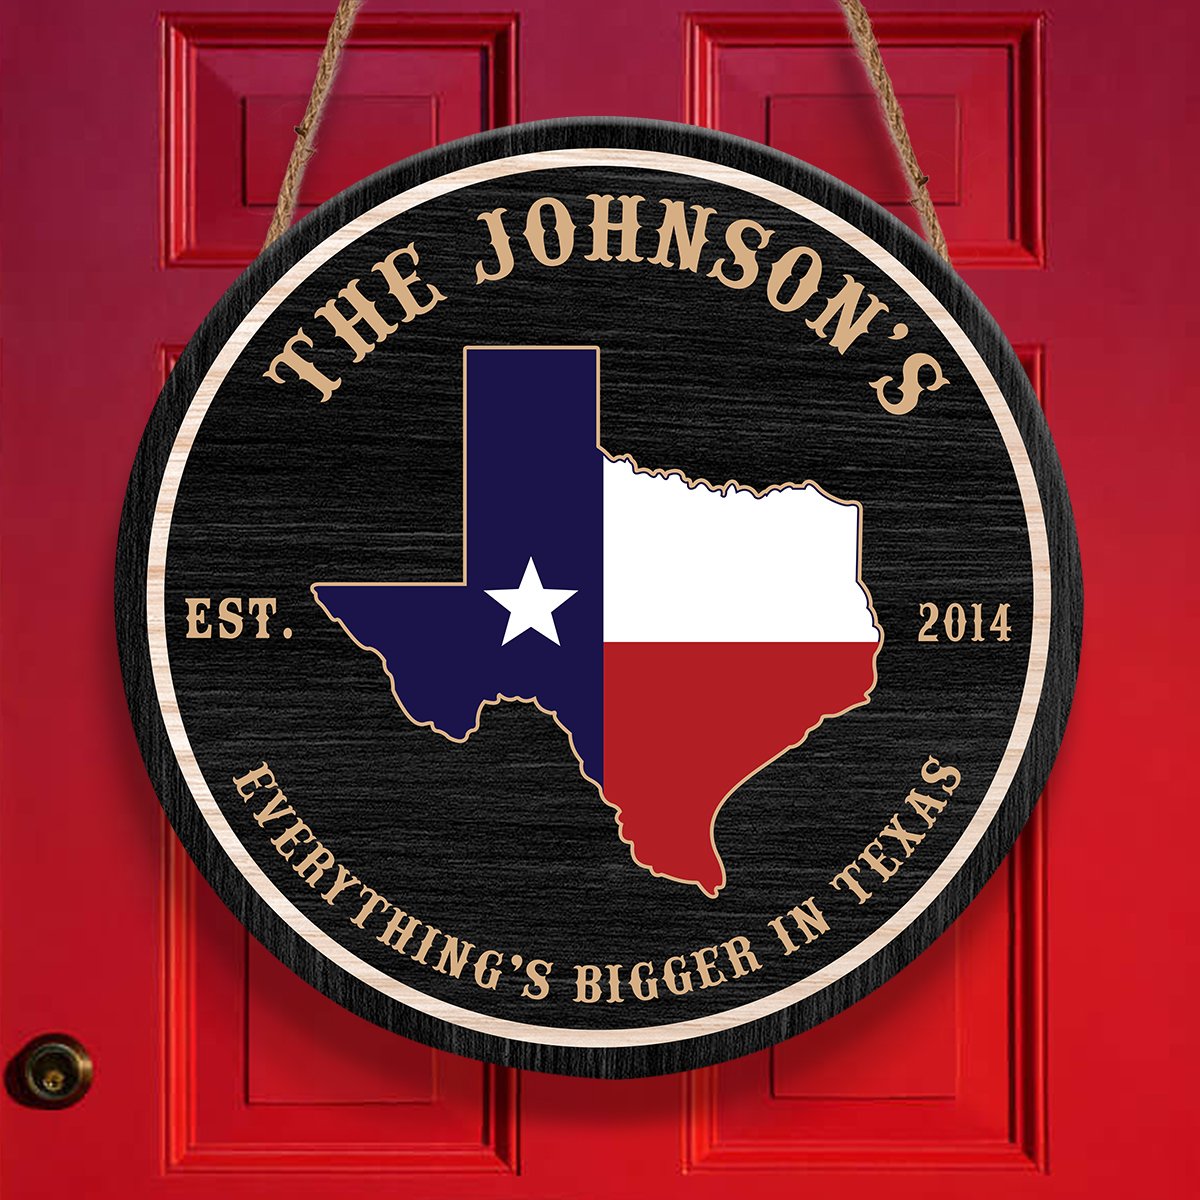 Everything's Bigger In Texas Family Personalizedwitch Personalized Round Wood Sign Outdoor Decor